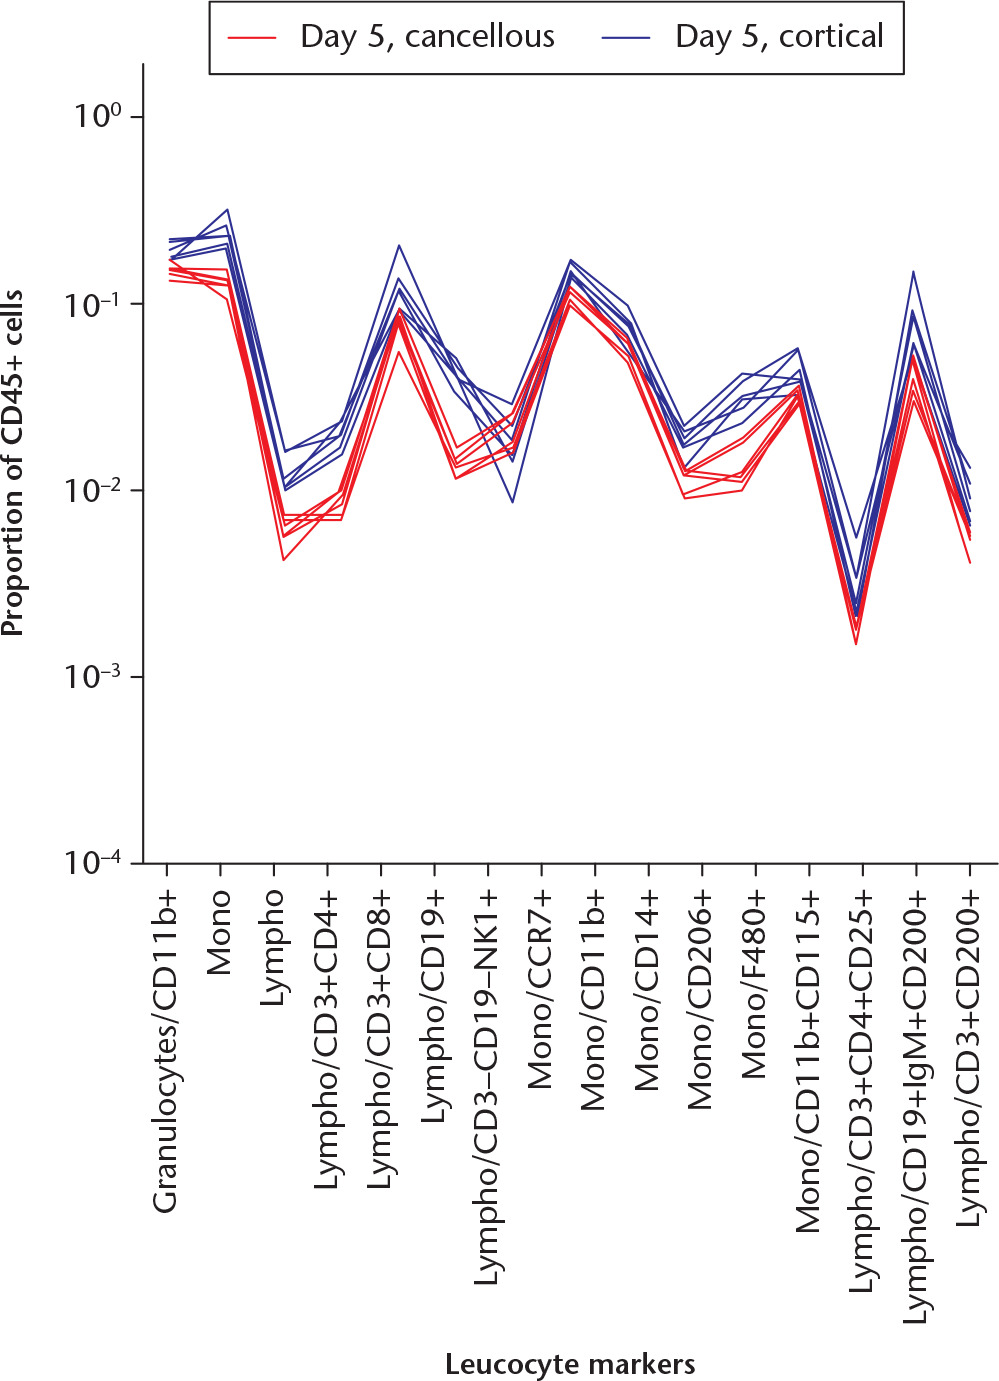 Fig. 4 
          A graph showing cellular responses in the cancellous and cortical models at day 5 adjusted for the increase in granulocytes in the cancellous model. Markers were related to the sum of CD45+ cells (doublet/live/CD45+) subtracted by the granulocyte count (doublet/live/CD45+ minus doublet/live/CD45+/granulocyte-). Each red line indicates a mouse with cancellous injury and each blue line indicates a mouse with a cortical defect. The differences in cell populations remain after taking the difference in numbers of granulocytes into account.
        